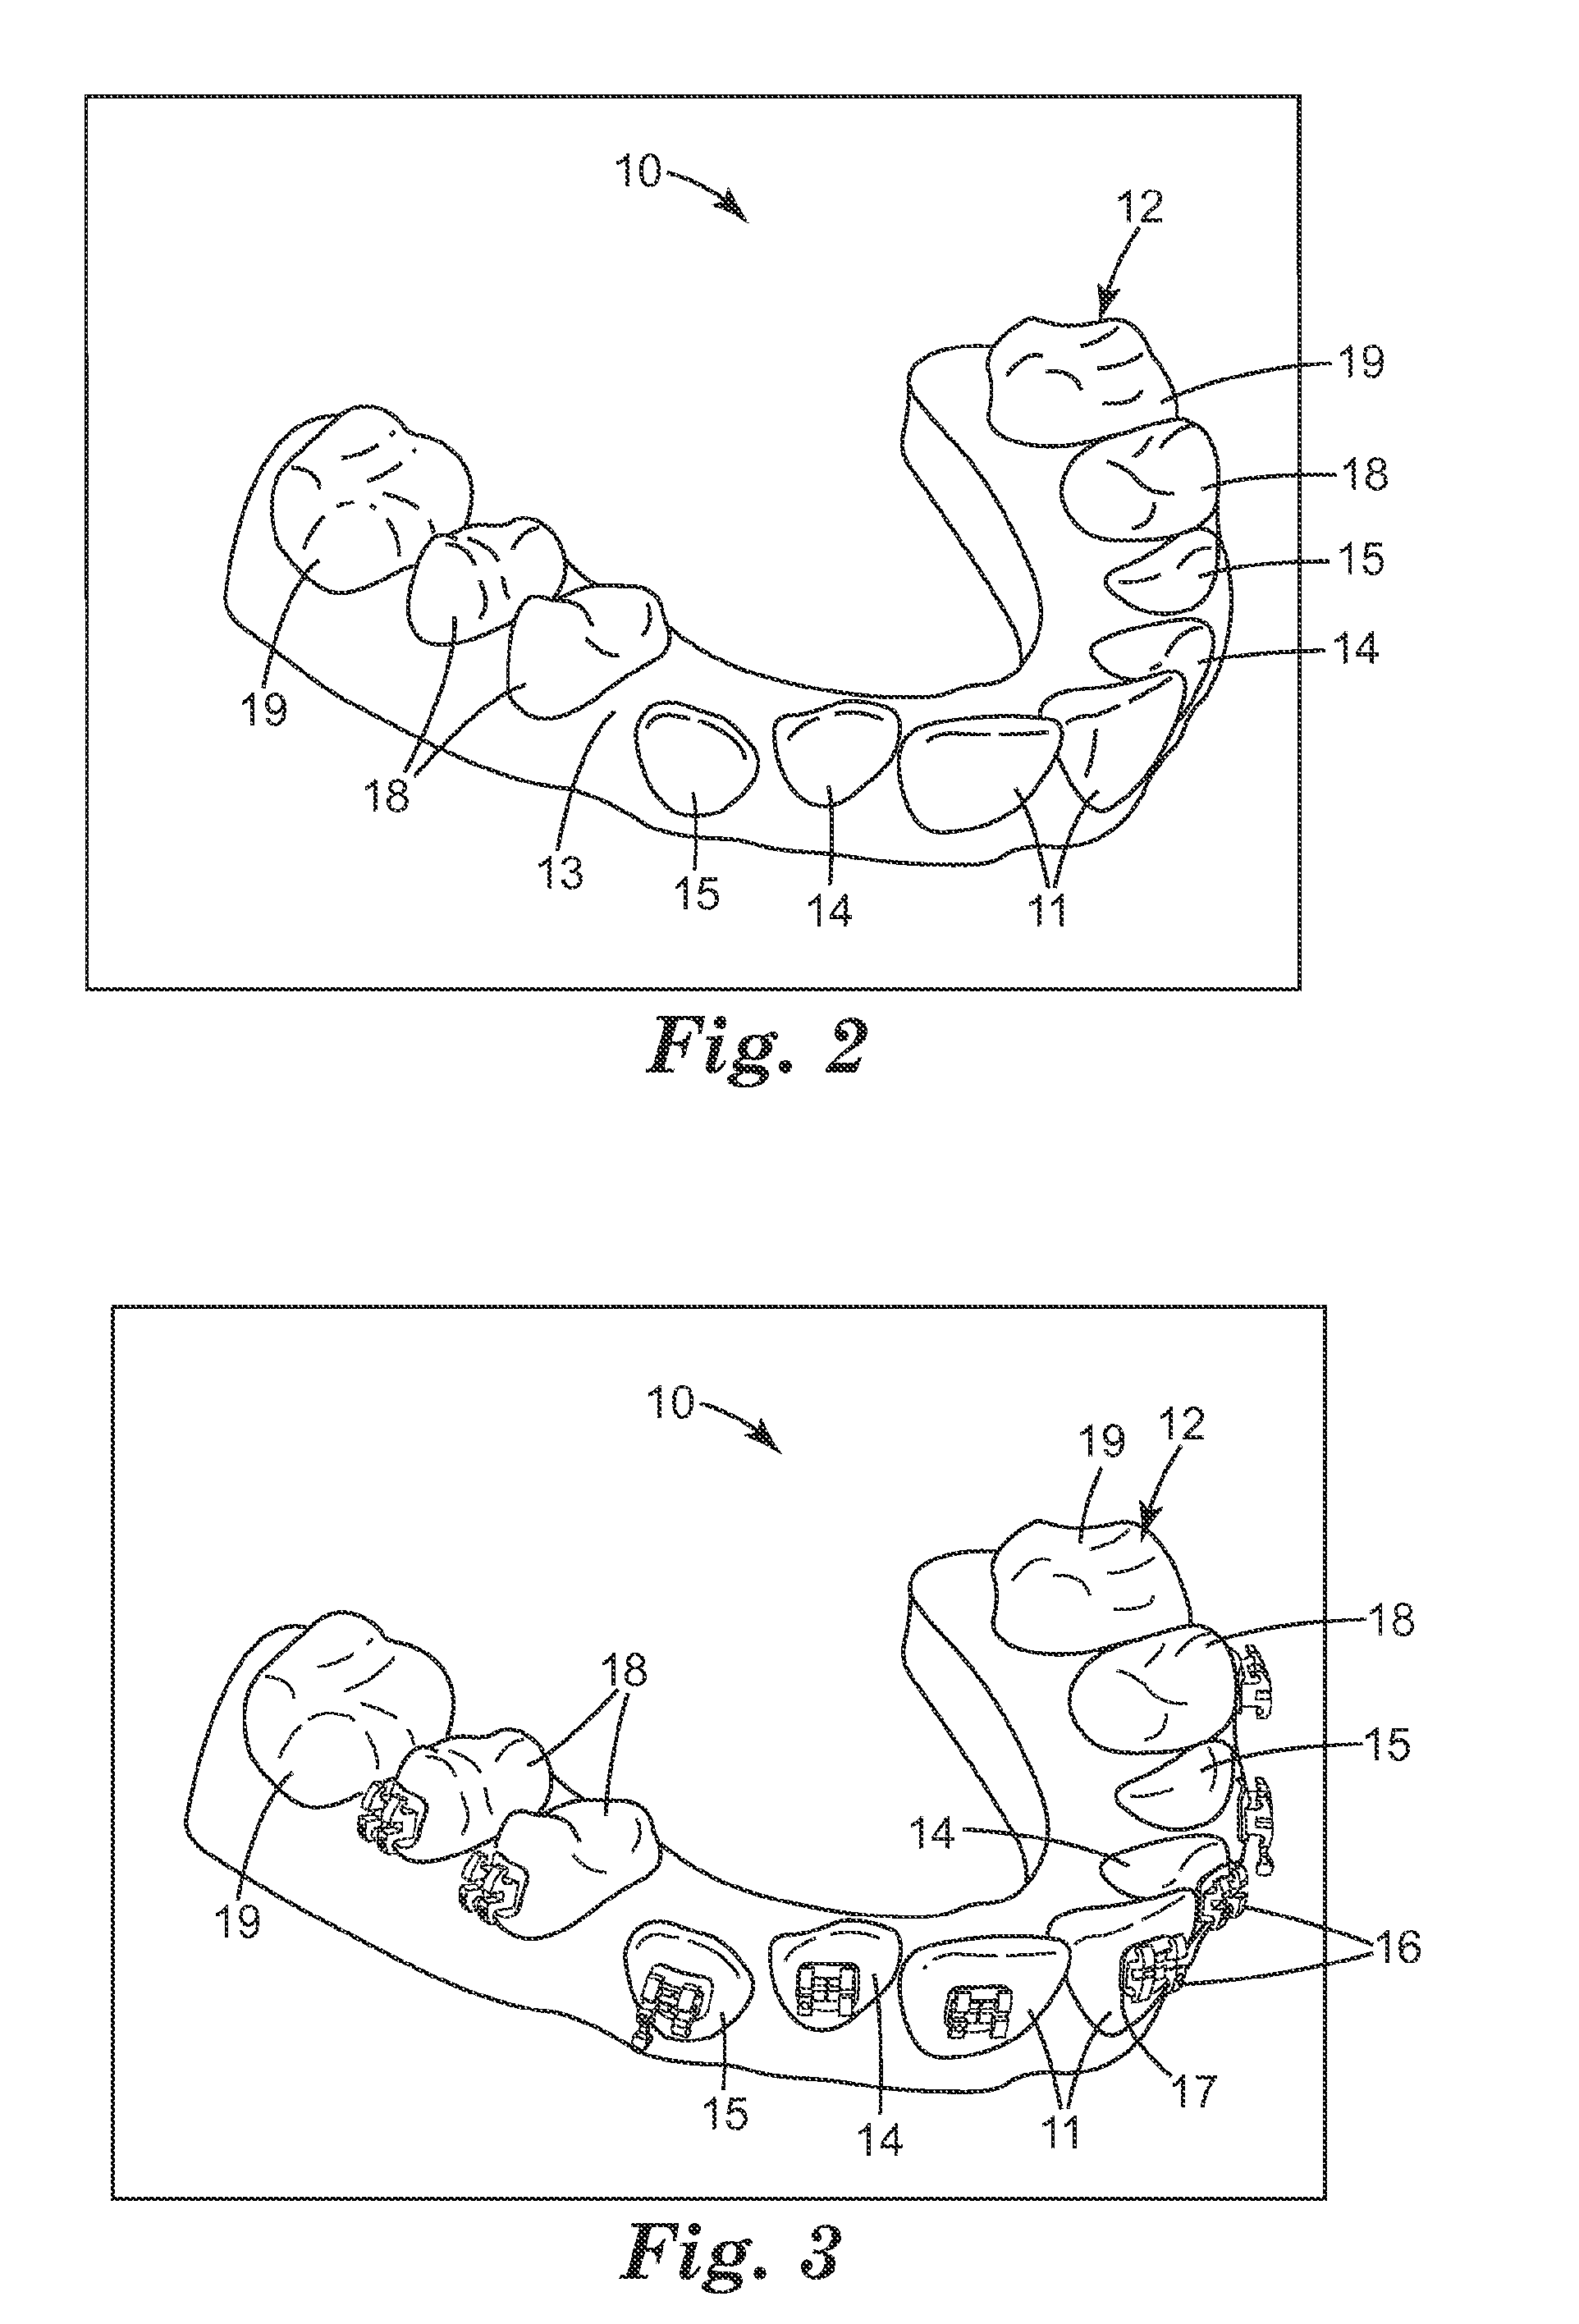 Rapid prototyped transfer tray for orthodontic appliances